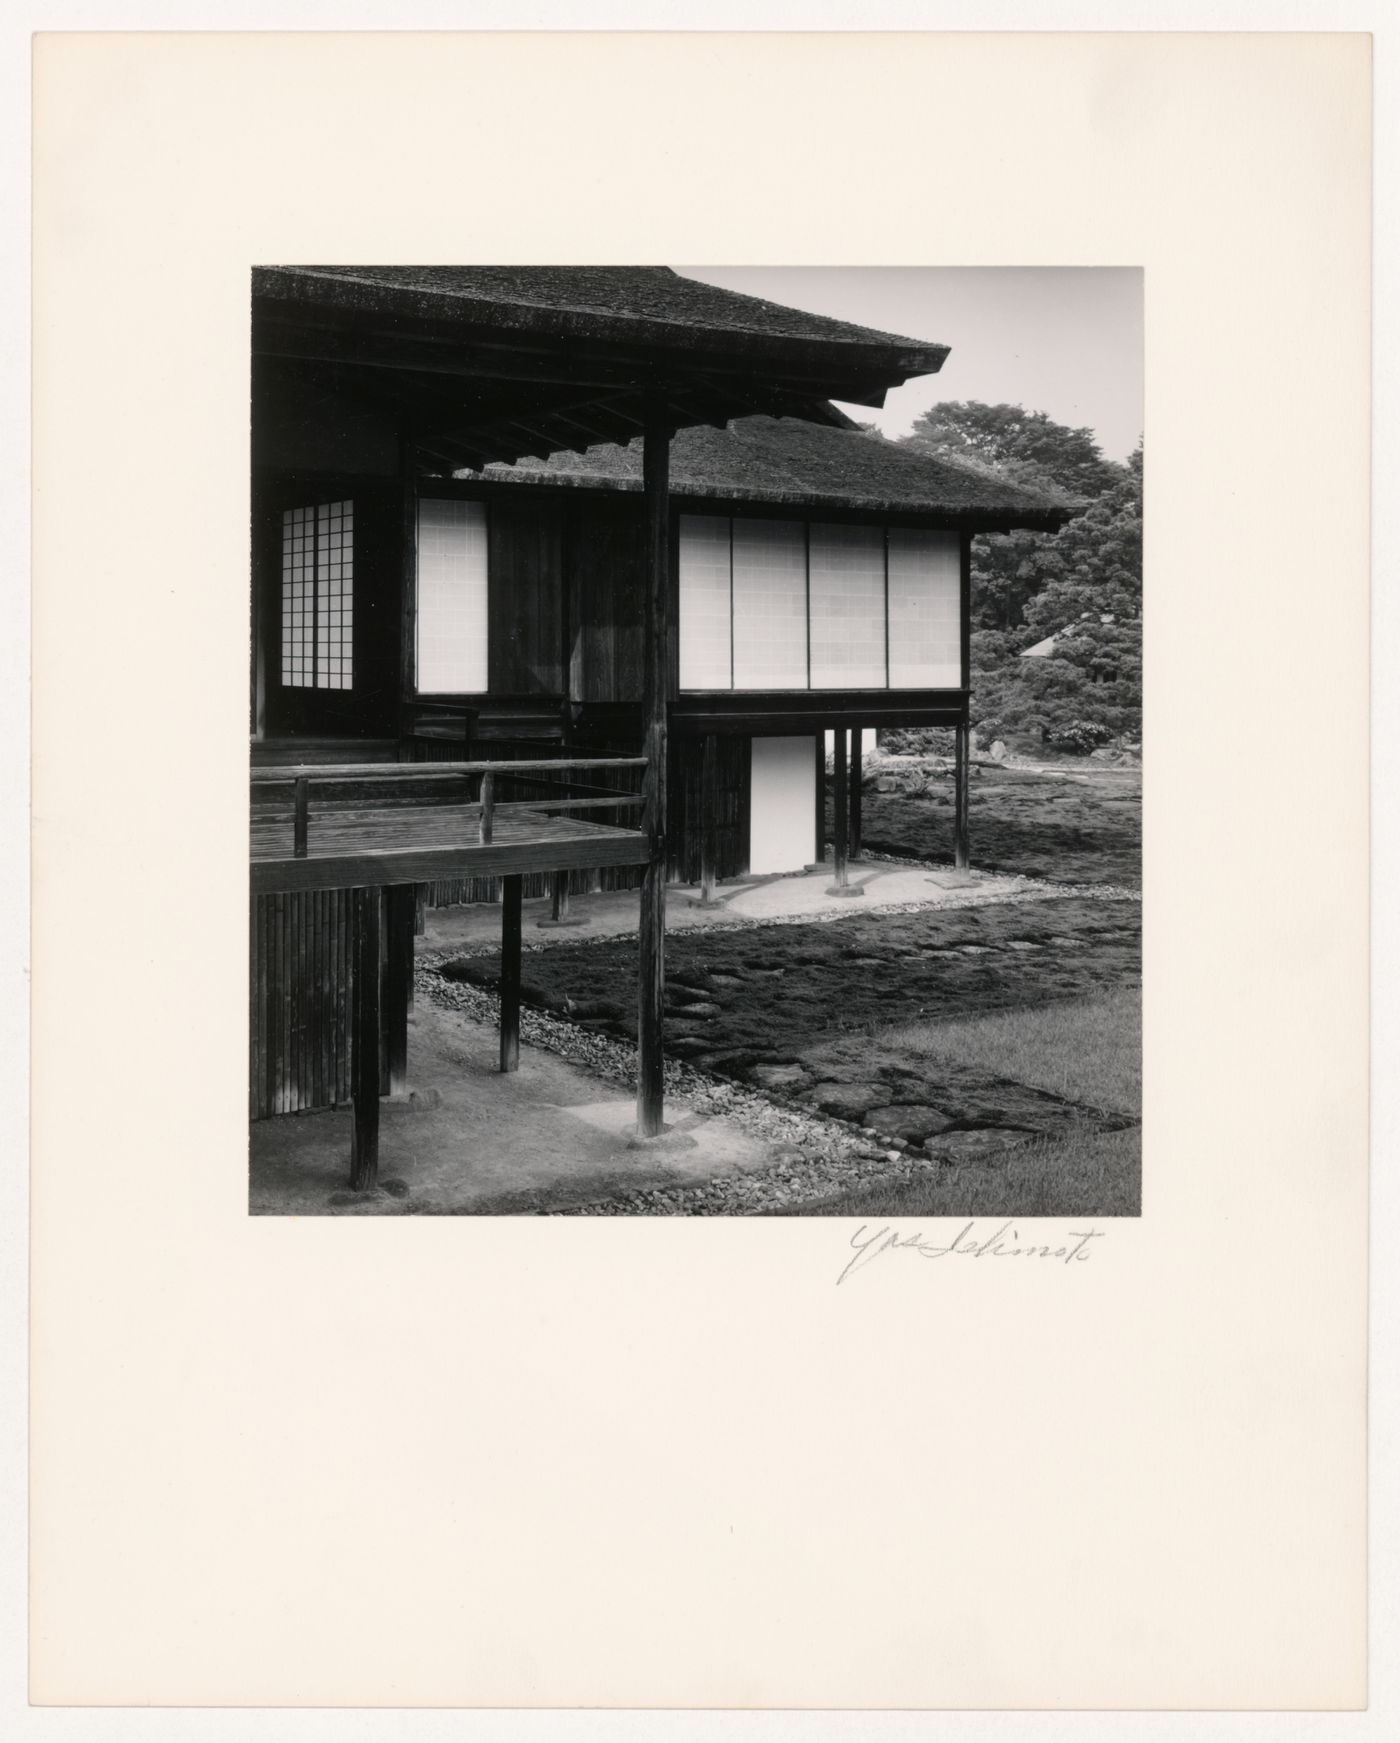 View of the Middle Shoin showing the veranda of the Music Room in the foreground, Katsura Rikyu (also known as Katsura Imperial Villa), Kyoto, Japan